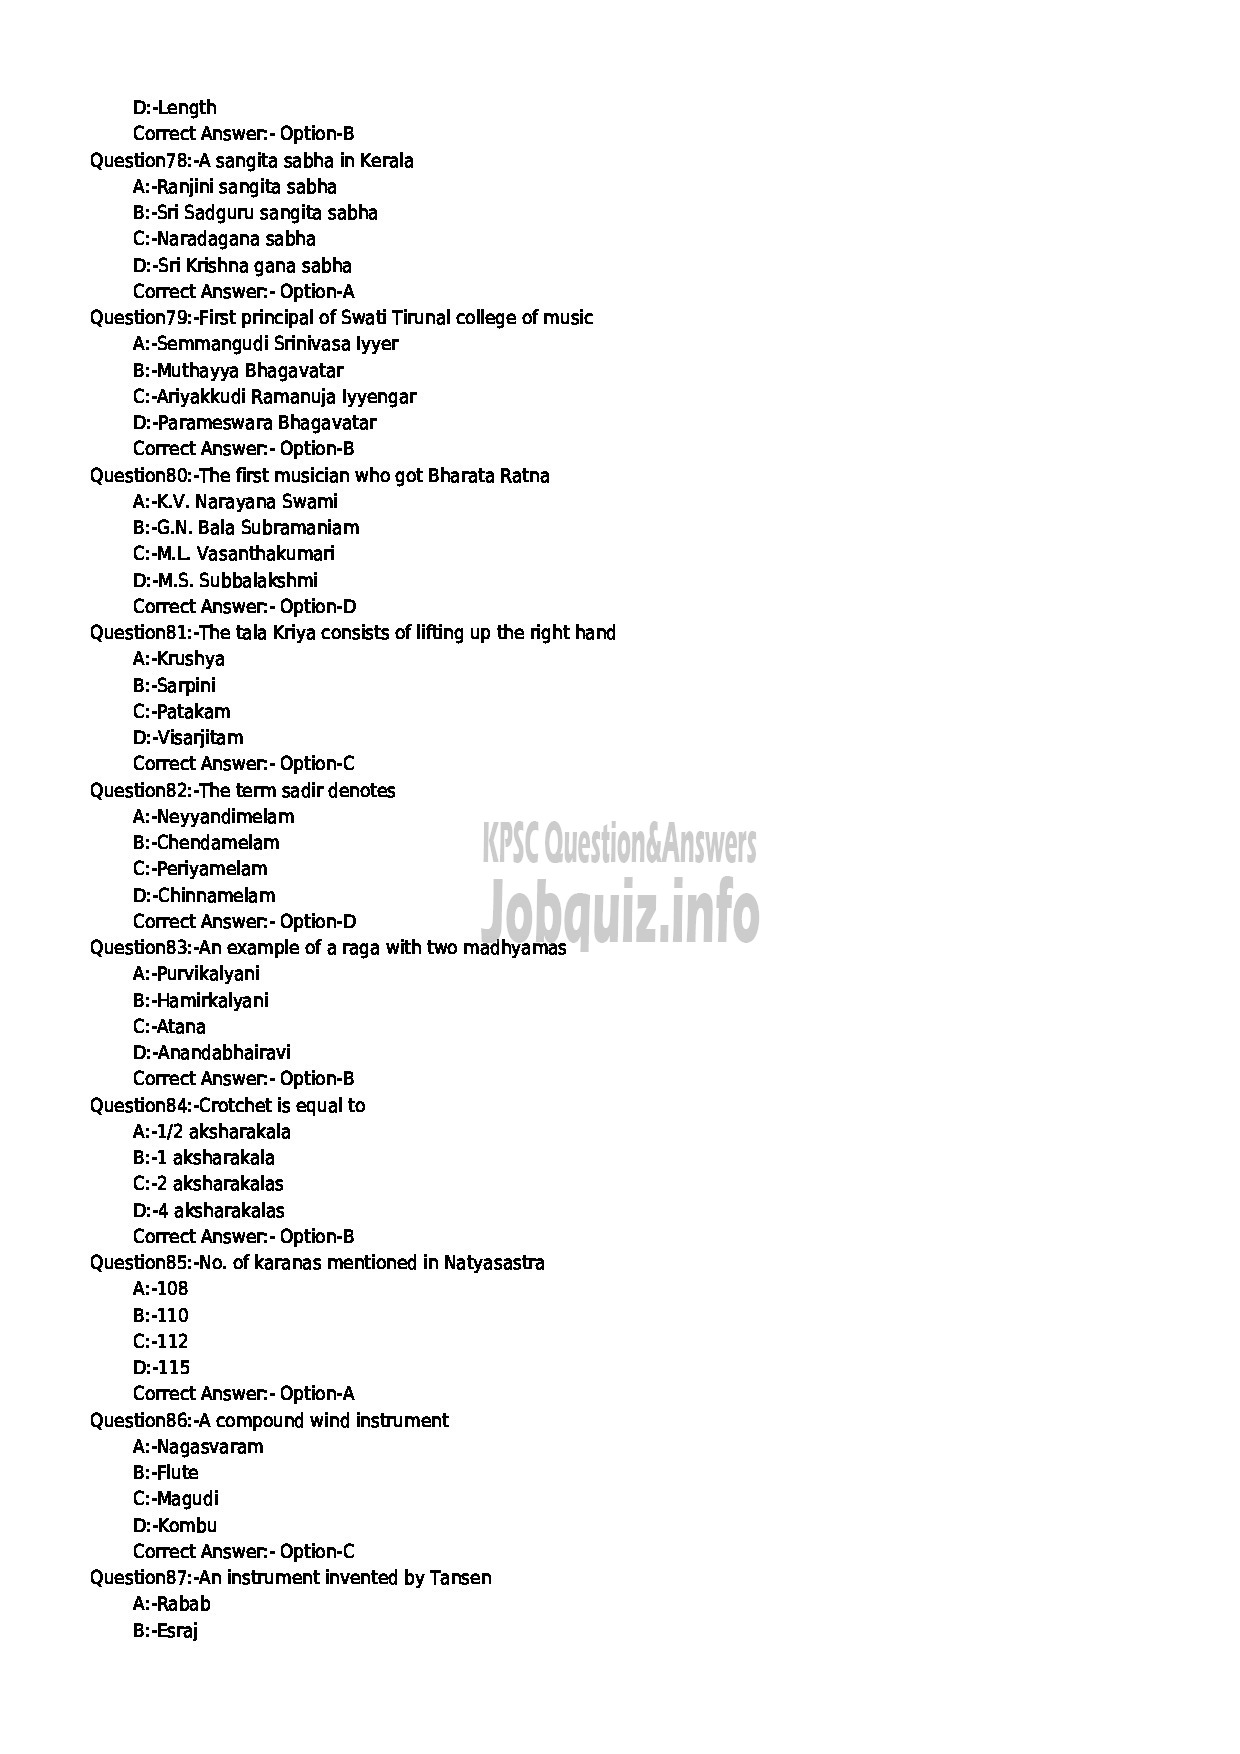 Kerala PSC Question Paper - LECTURER IN VOCAL COLLEGIATE EDUCATION MUSIC COLLEGES-9